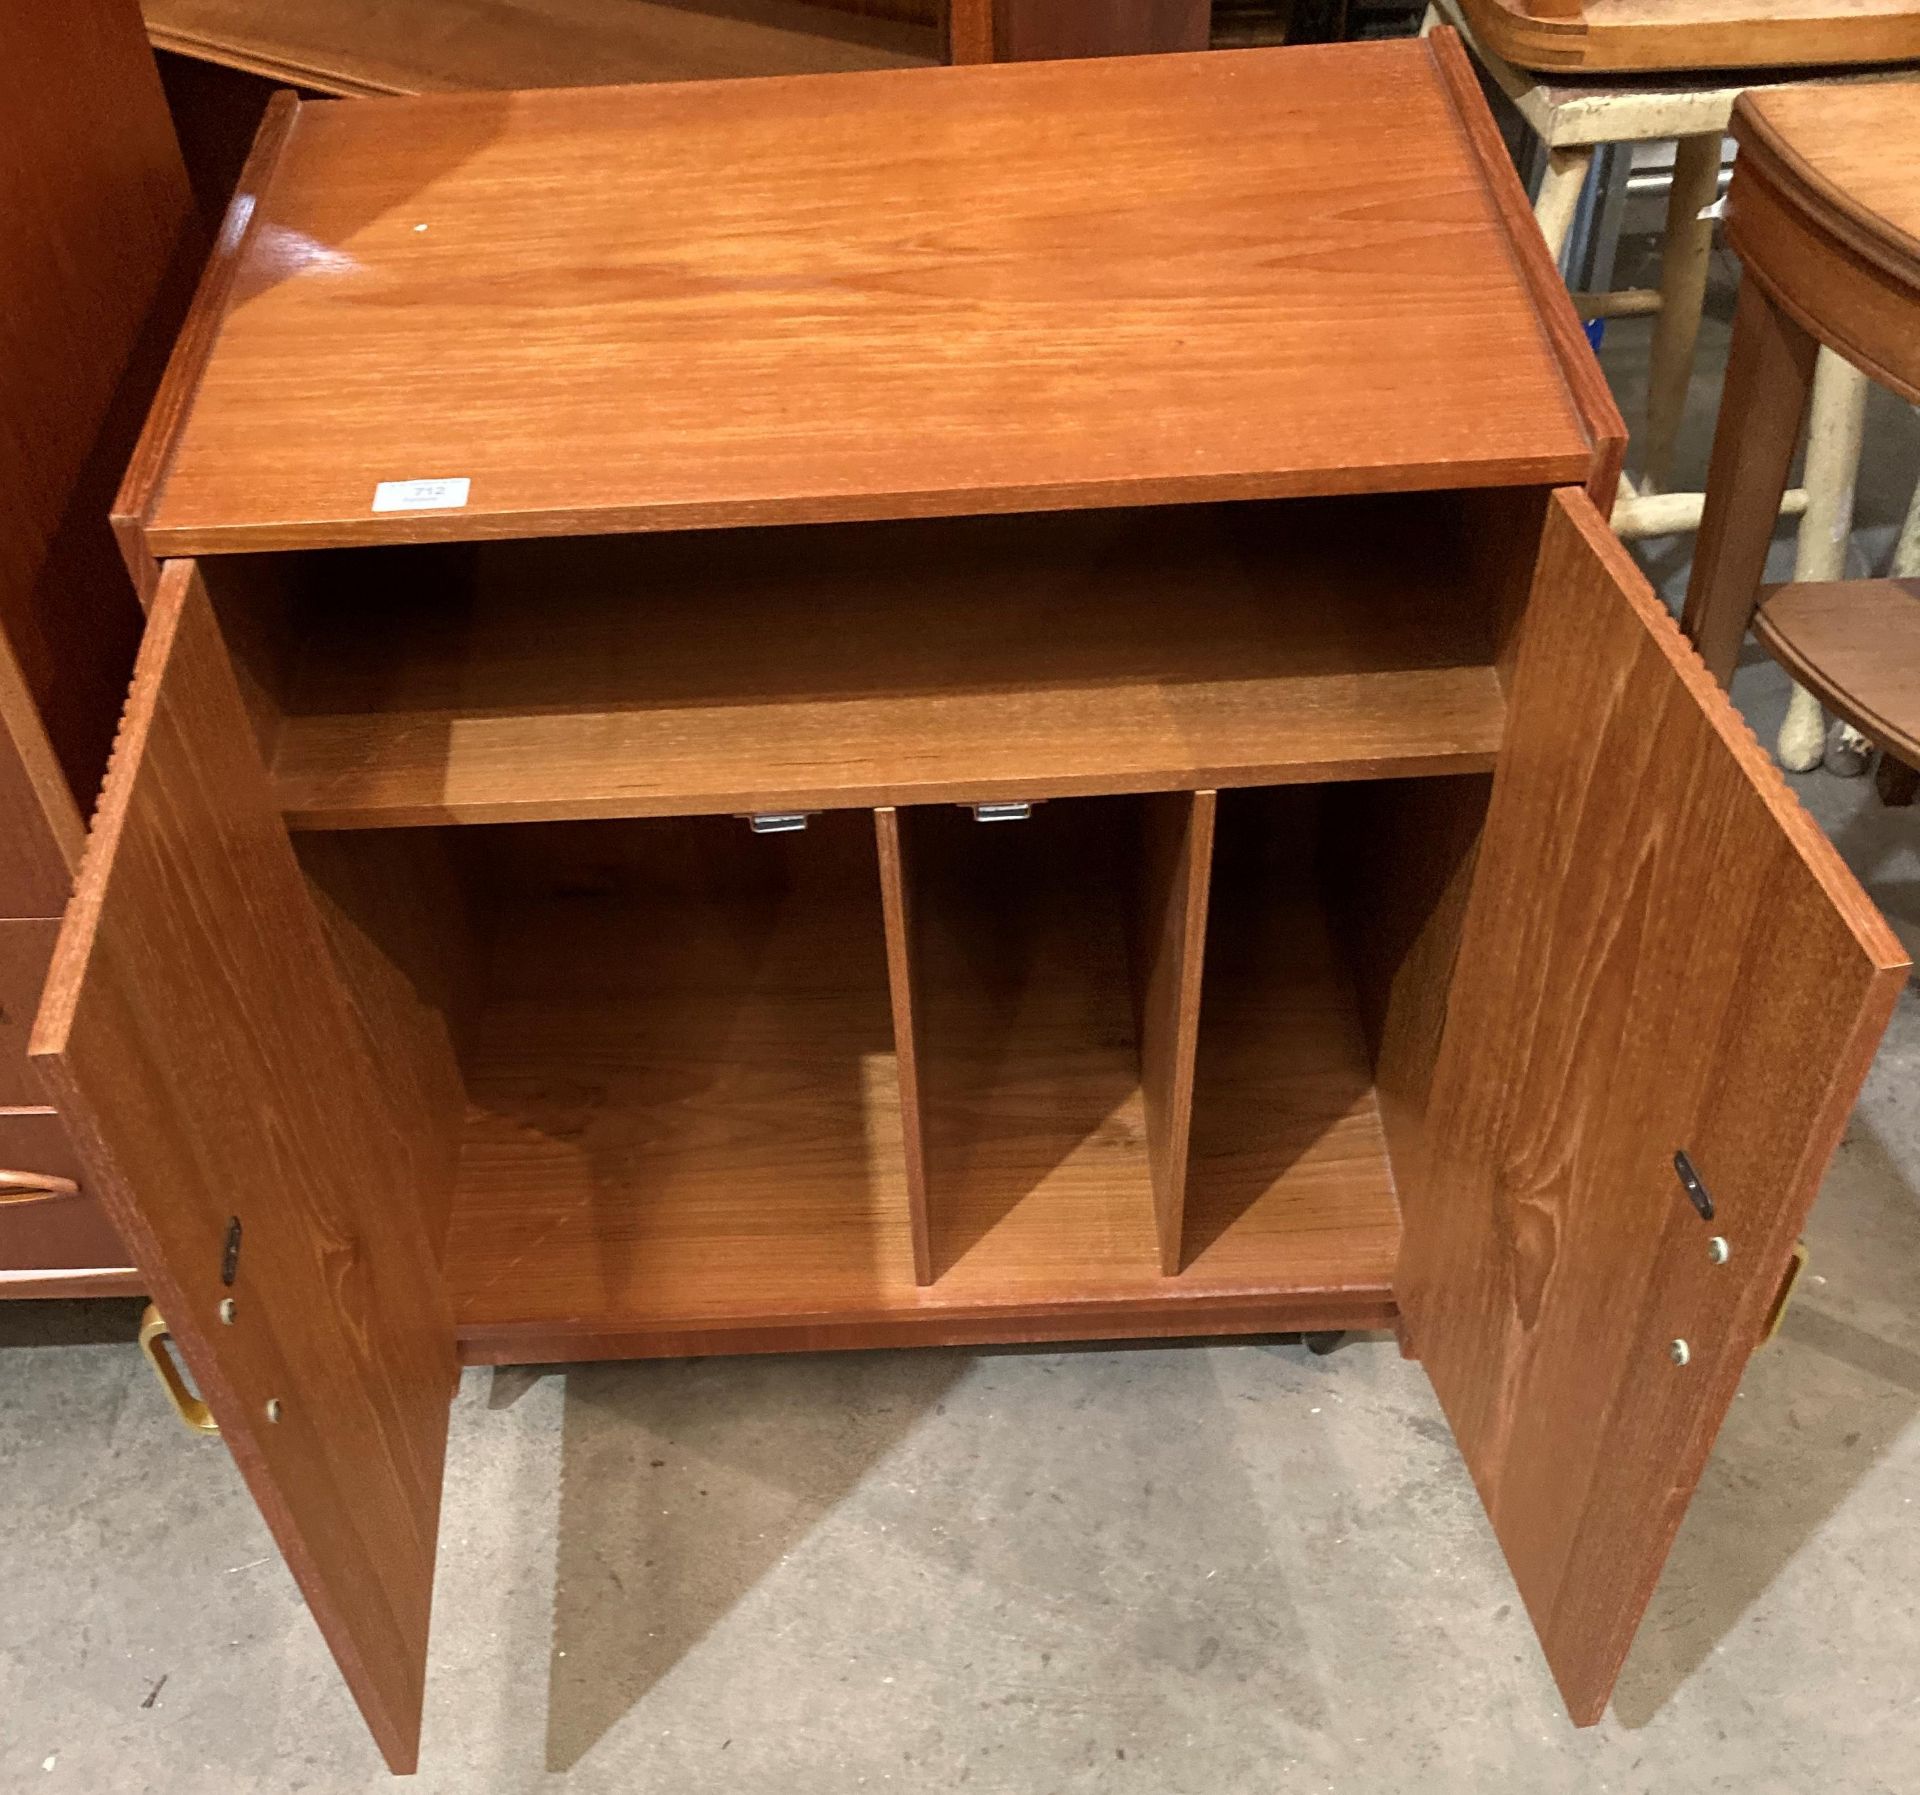 A teak two door mobile record cabinet - 64 x 42 a 69cm high (saleroom location: MS) - Image 2 of 2